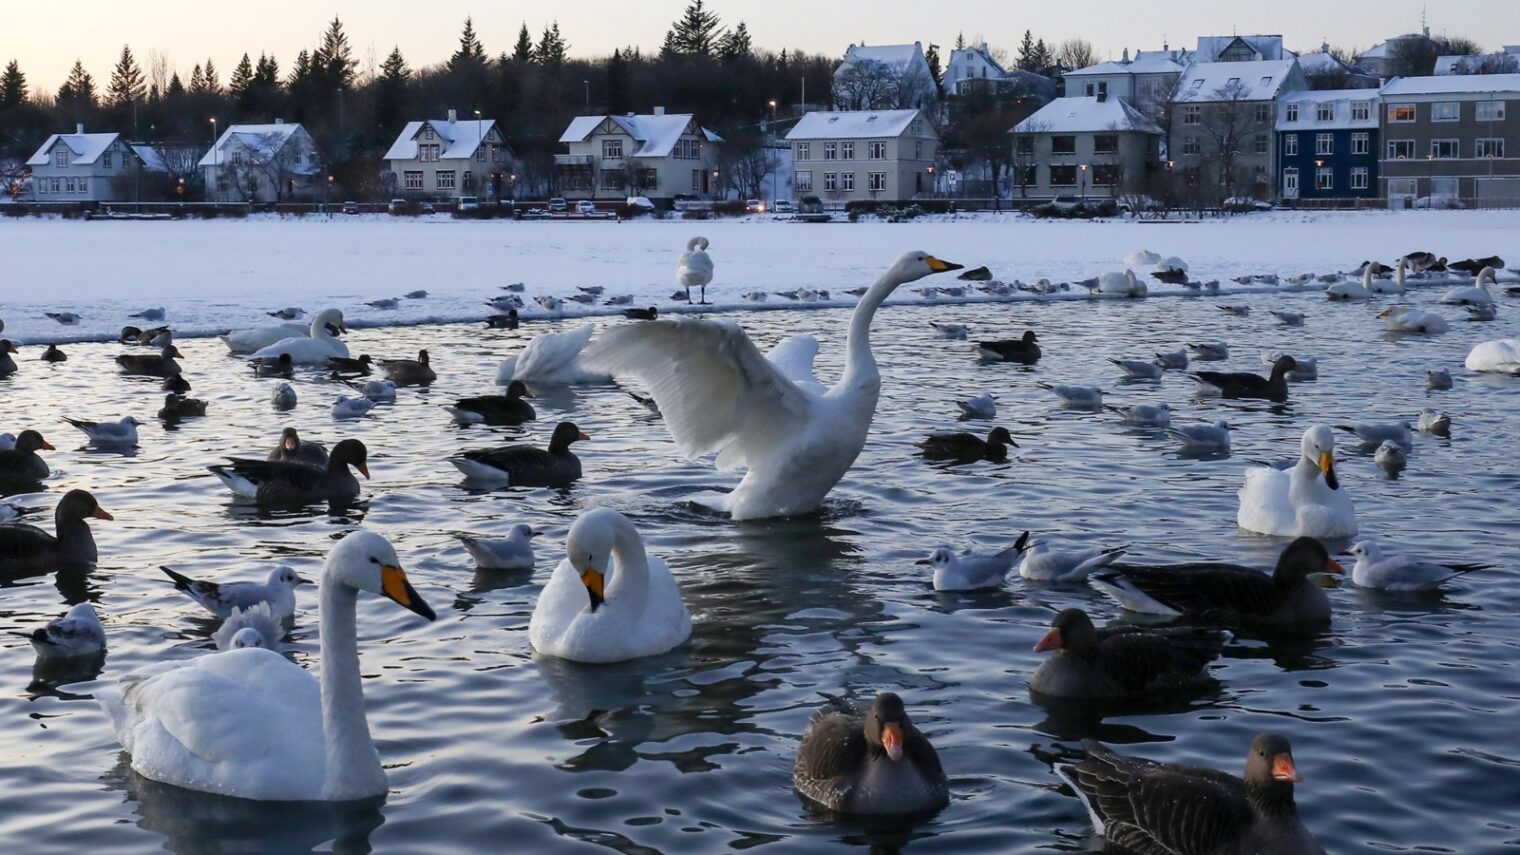 Dozens of swans, ducks and other water birds crowd into a small area of a freshwater lake which had almost completely frozen over in Reykjavik, Iceland. Photo by Ilan Rogers